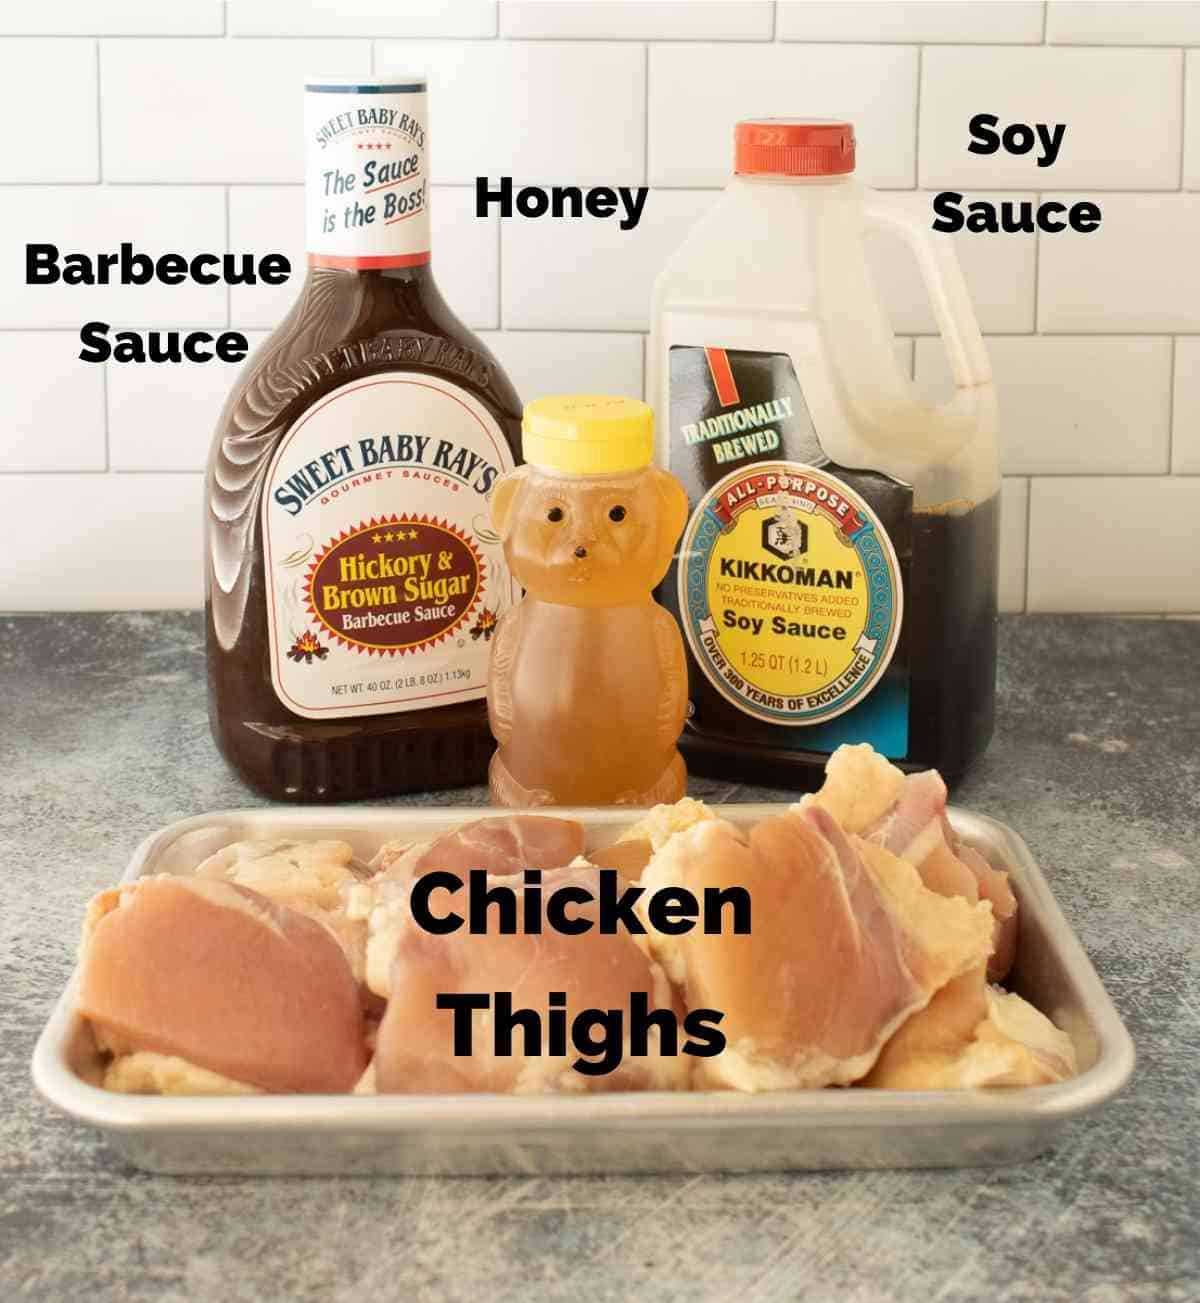 Barbecue sauce, honey, soy sauce and chicken thighs.